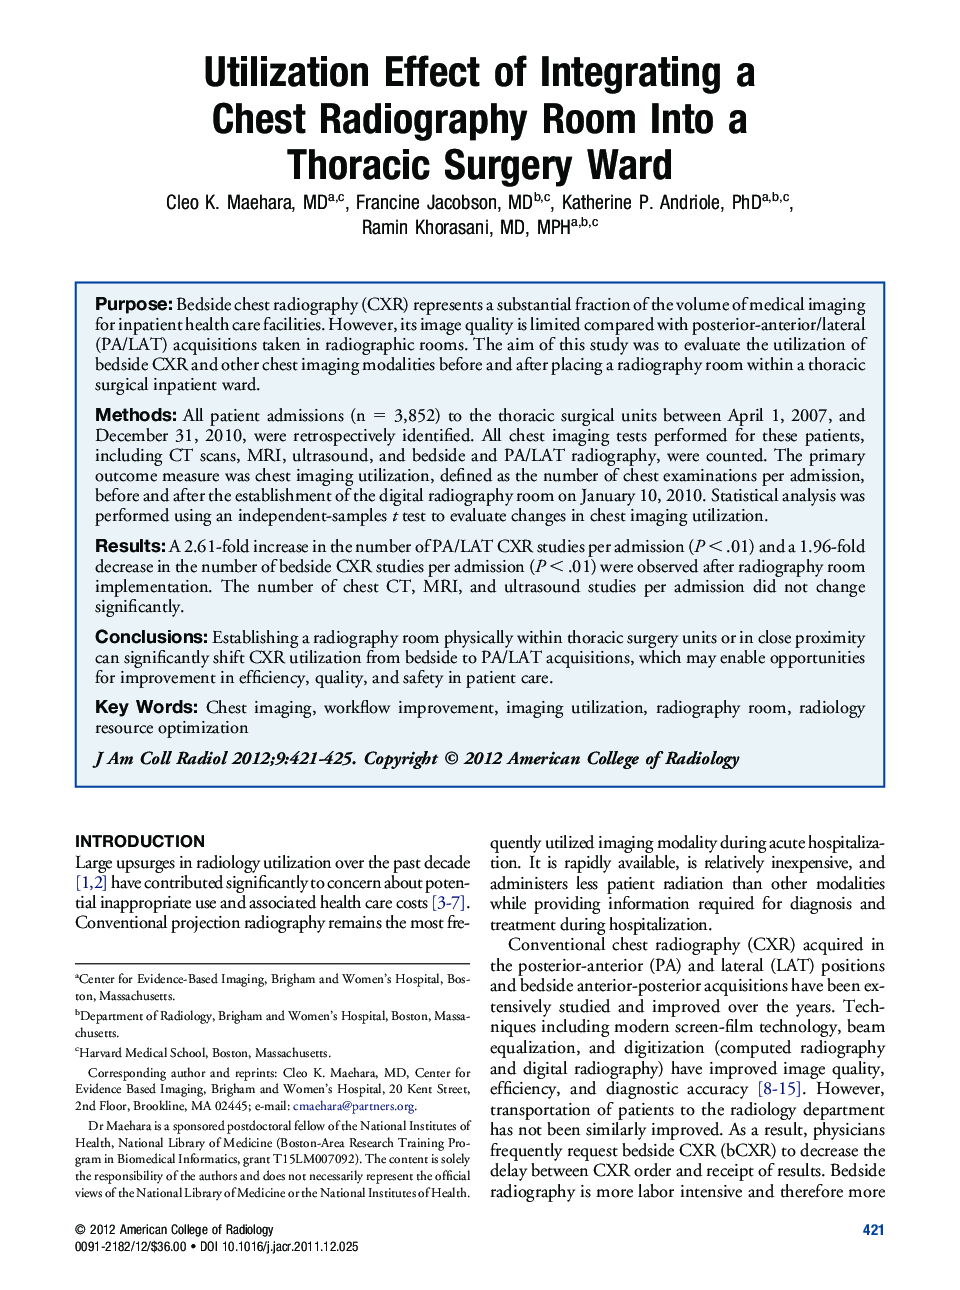 Utilization Effect of Integrating a Chest Radiography Room Into a Thoracic Surgery Ward